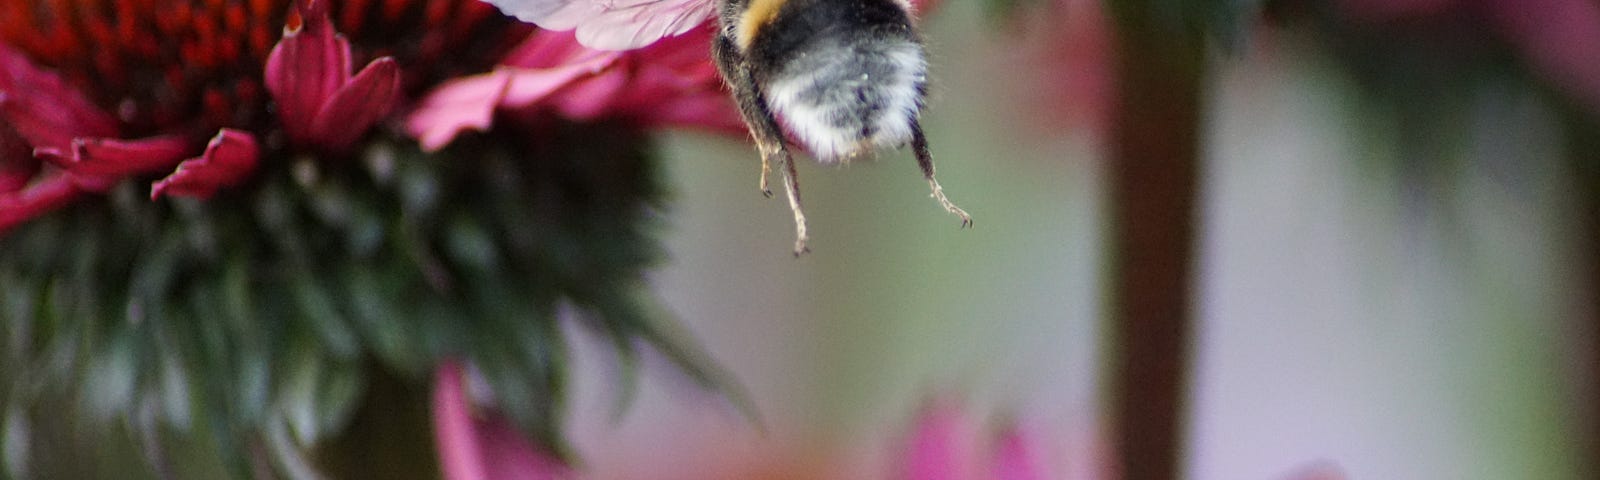 Buff-tailed bumblebee taking flight while foraging on, and pollinating, flowers